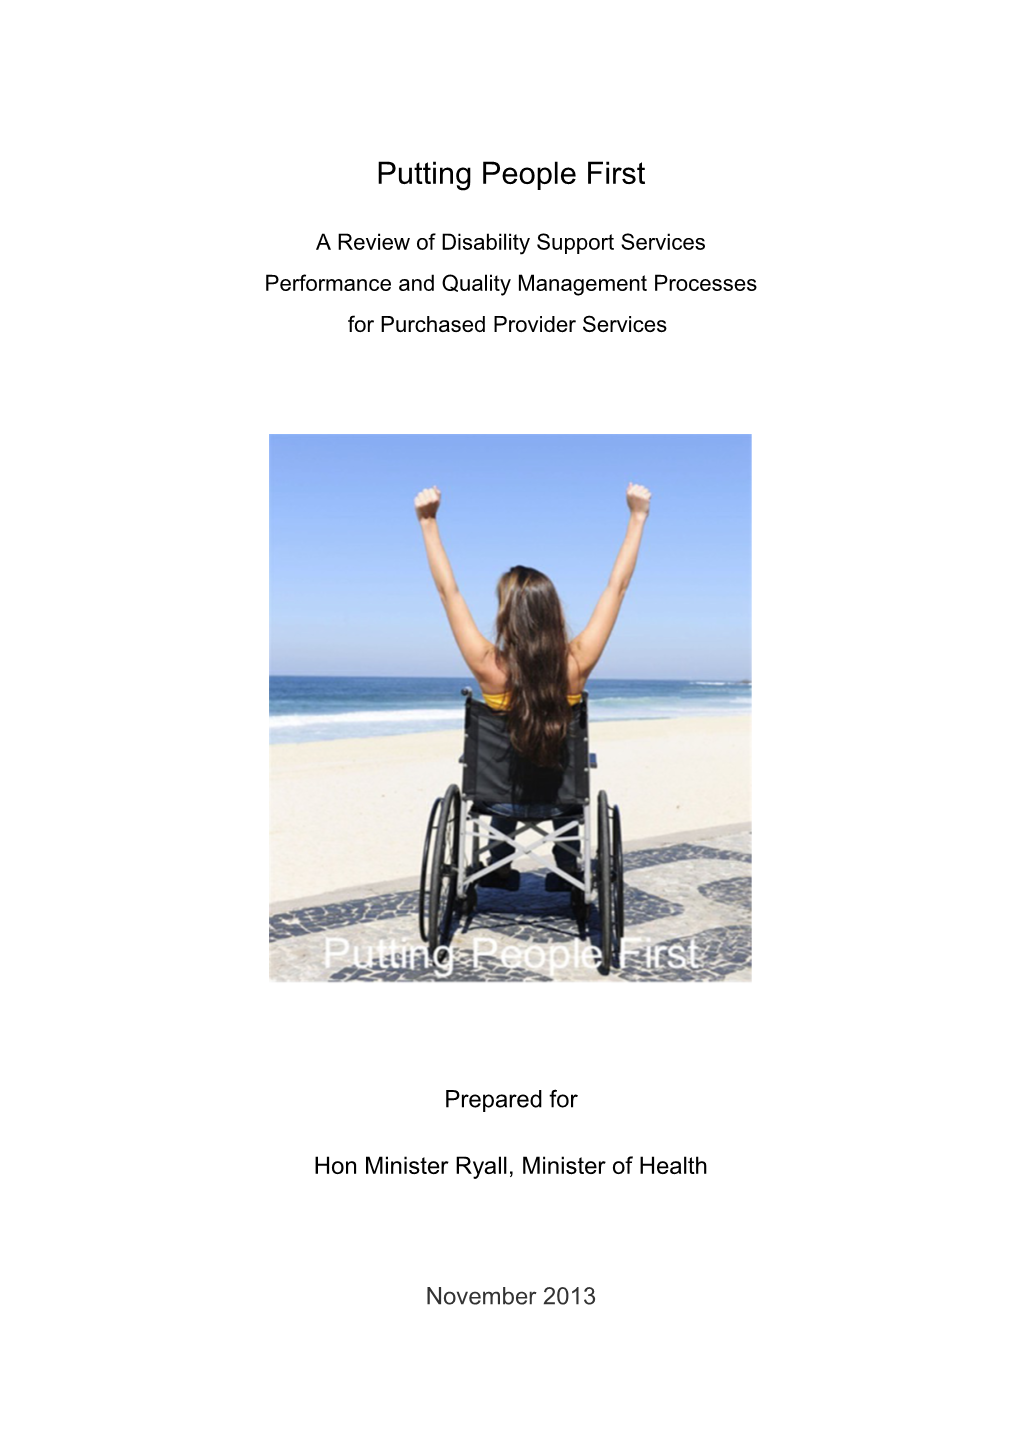 A Review of Disability Support Services